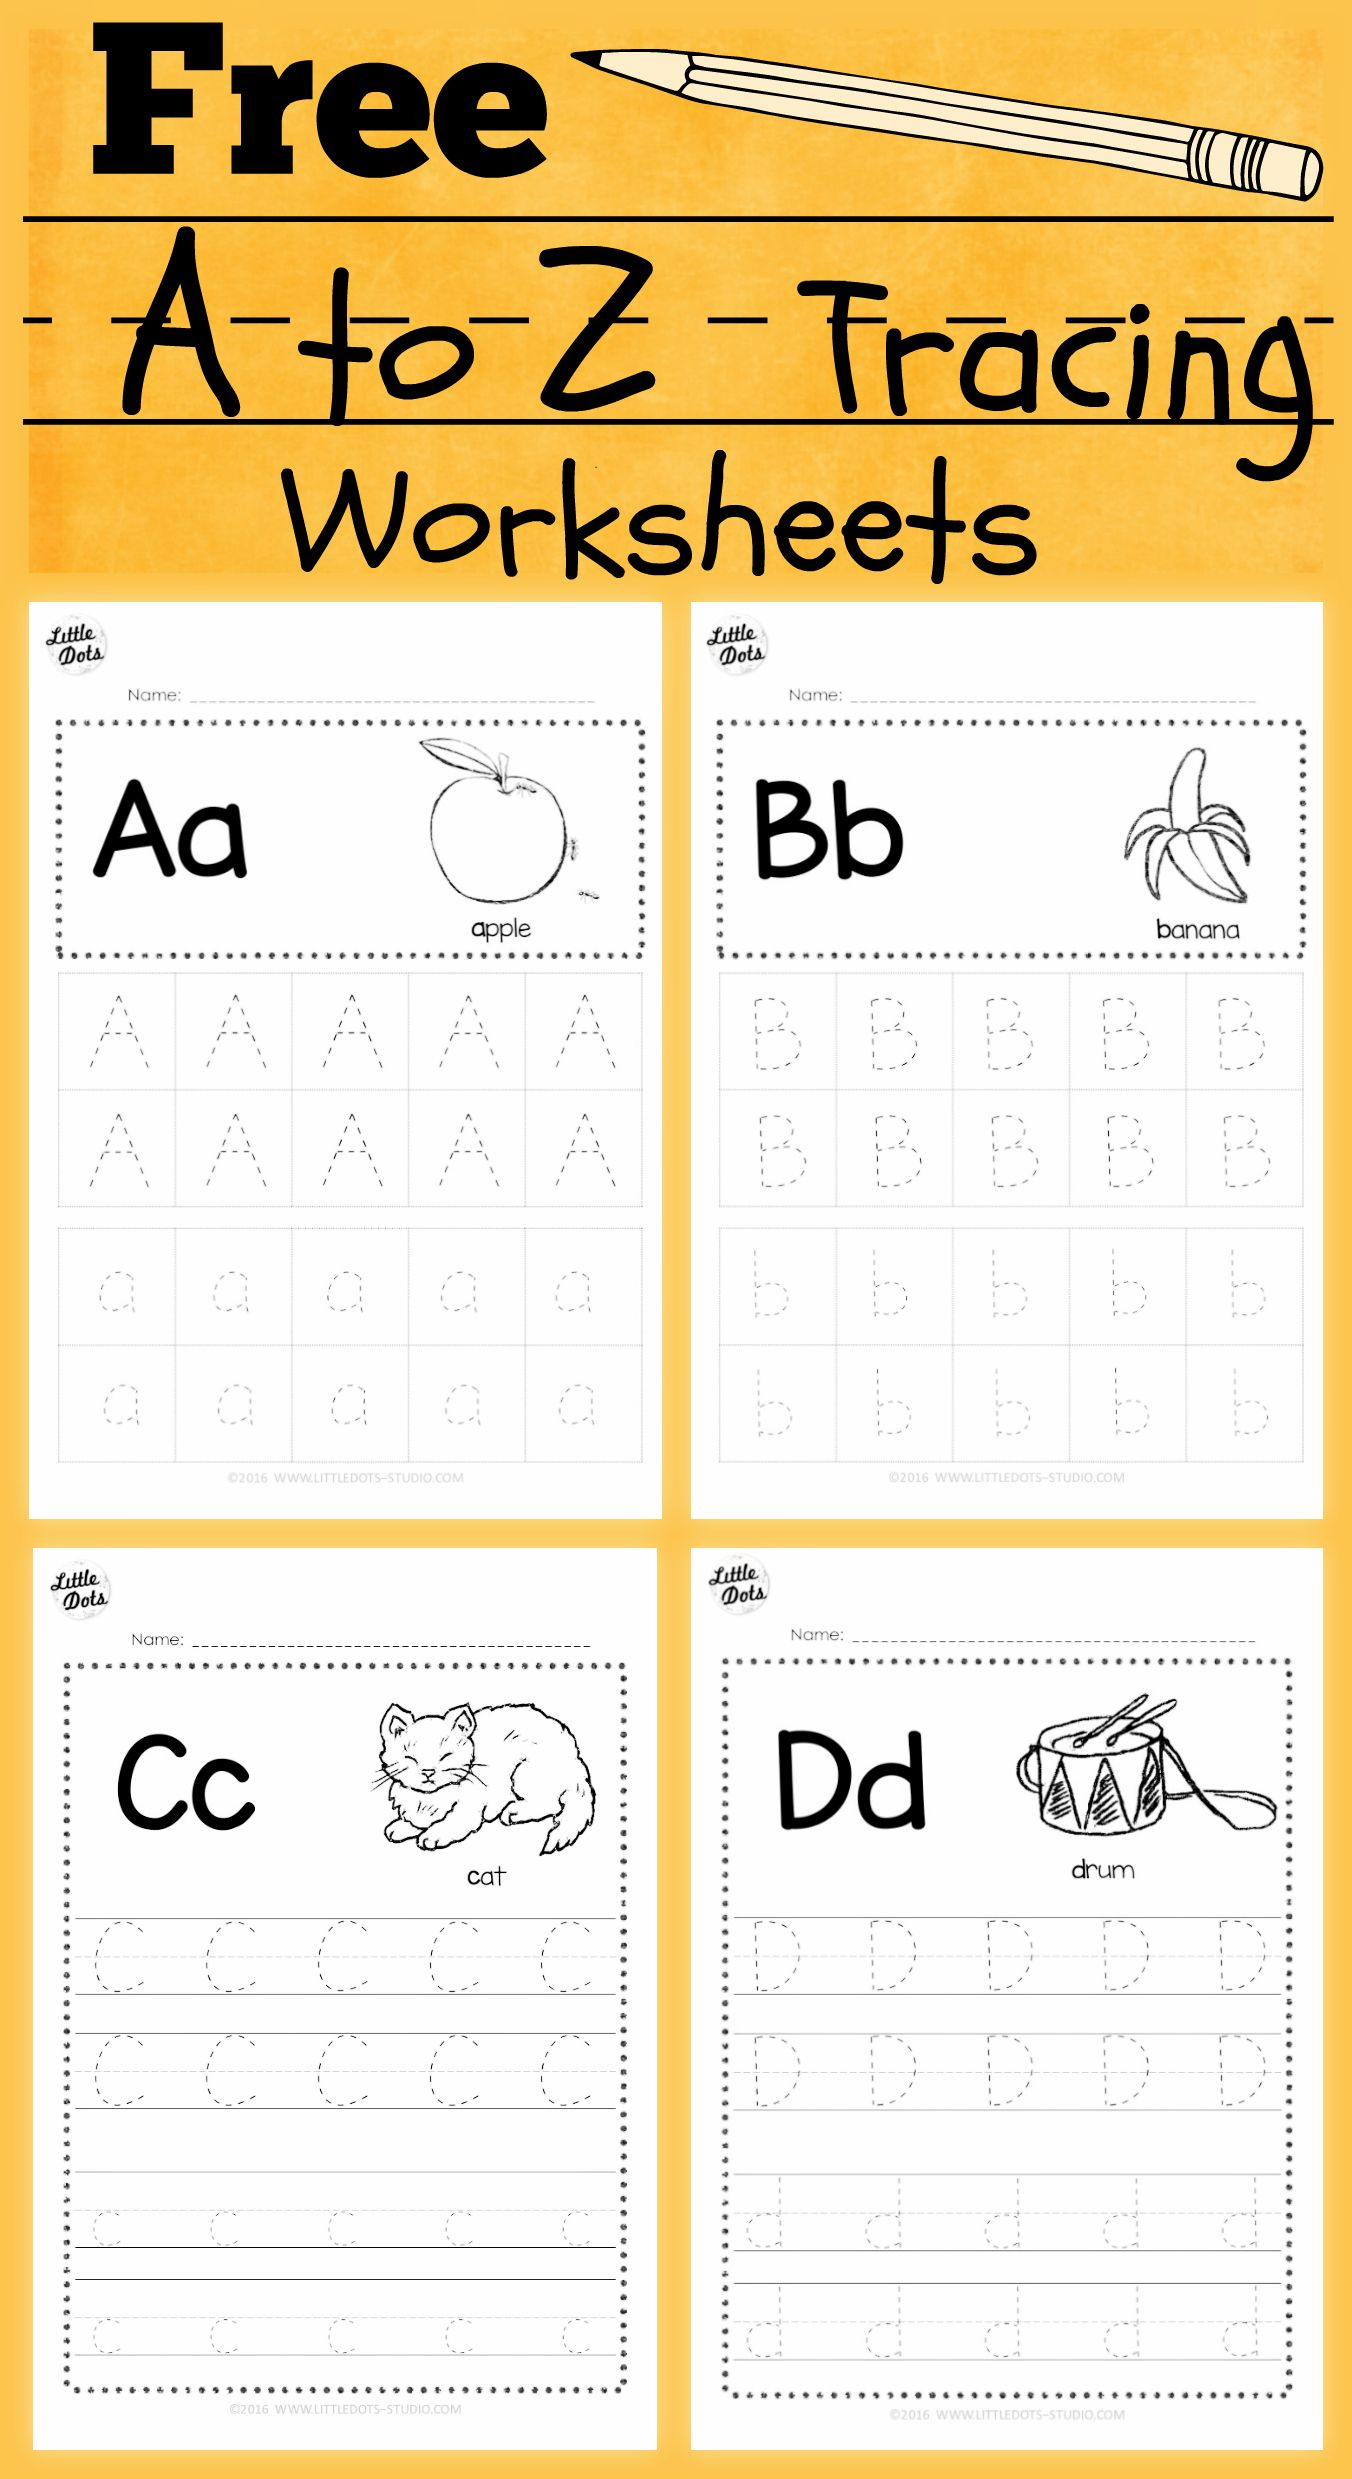 Download Free Alphabet Tracing Worksheets For Letter A To Z Suitable 